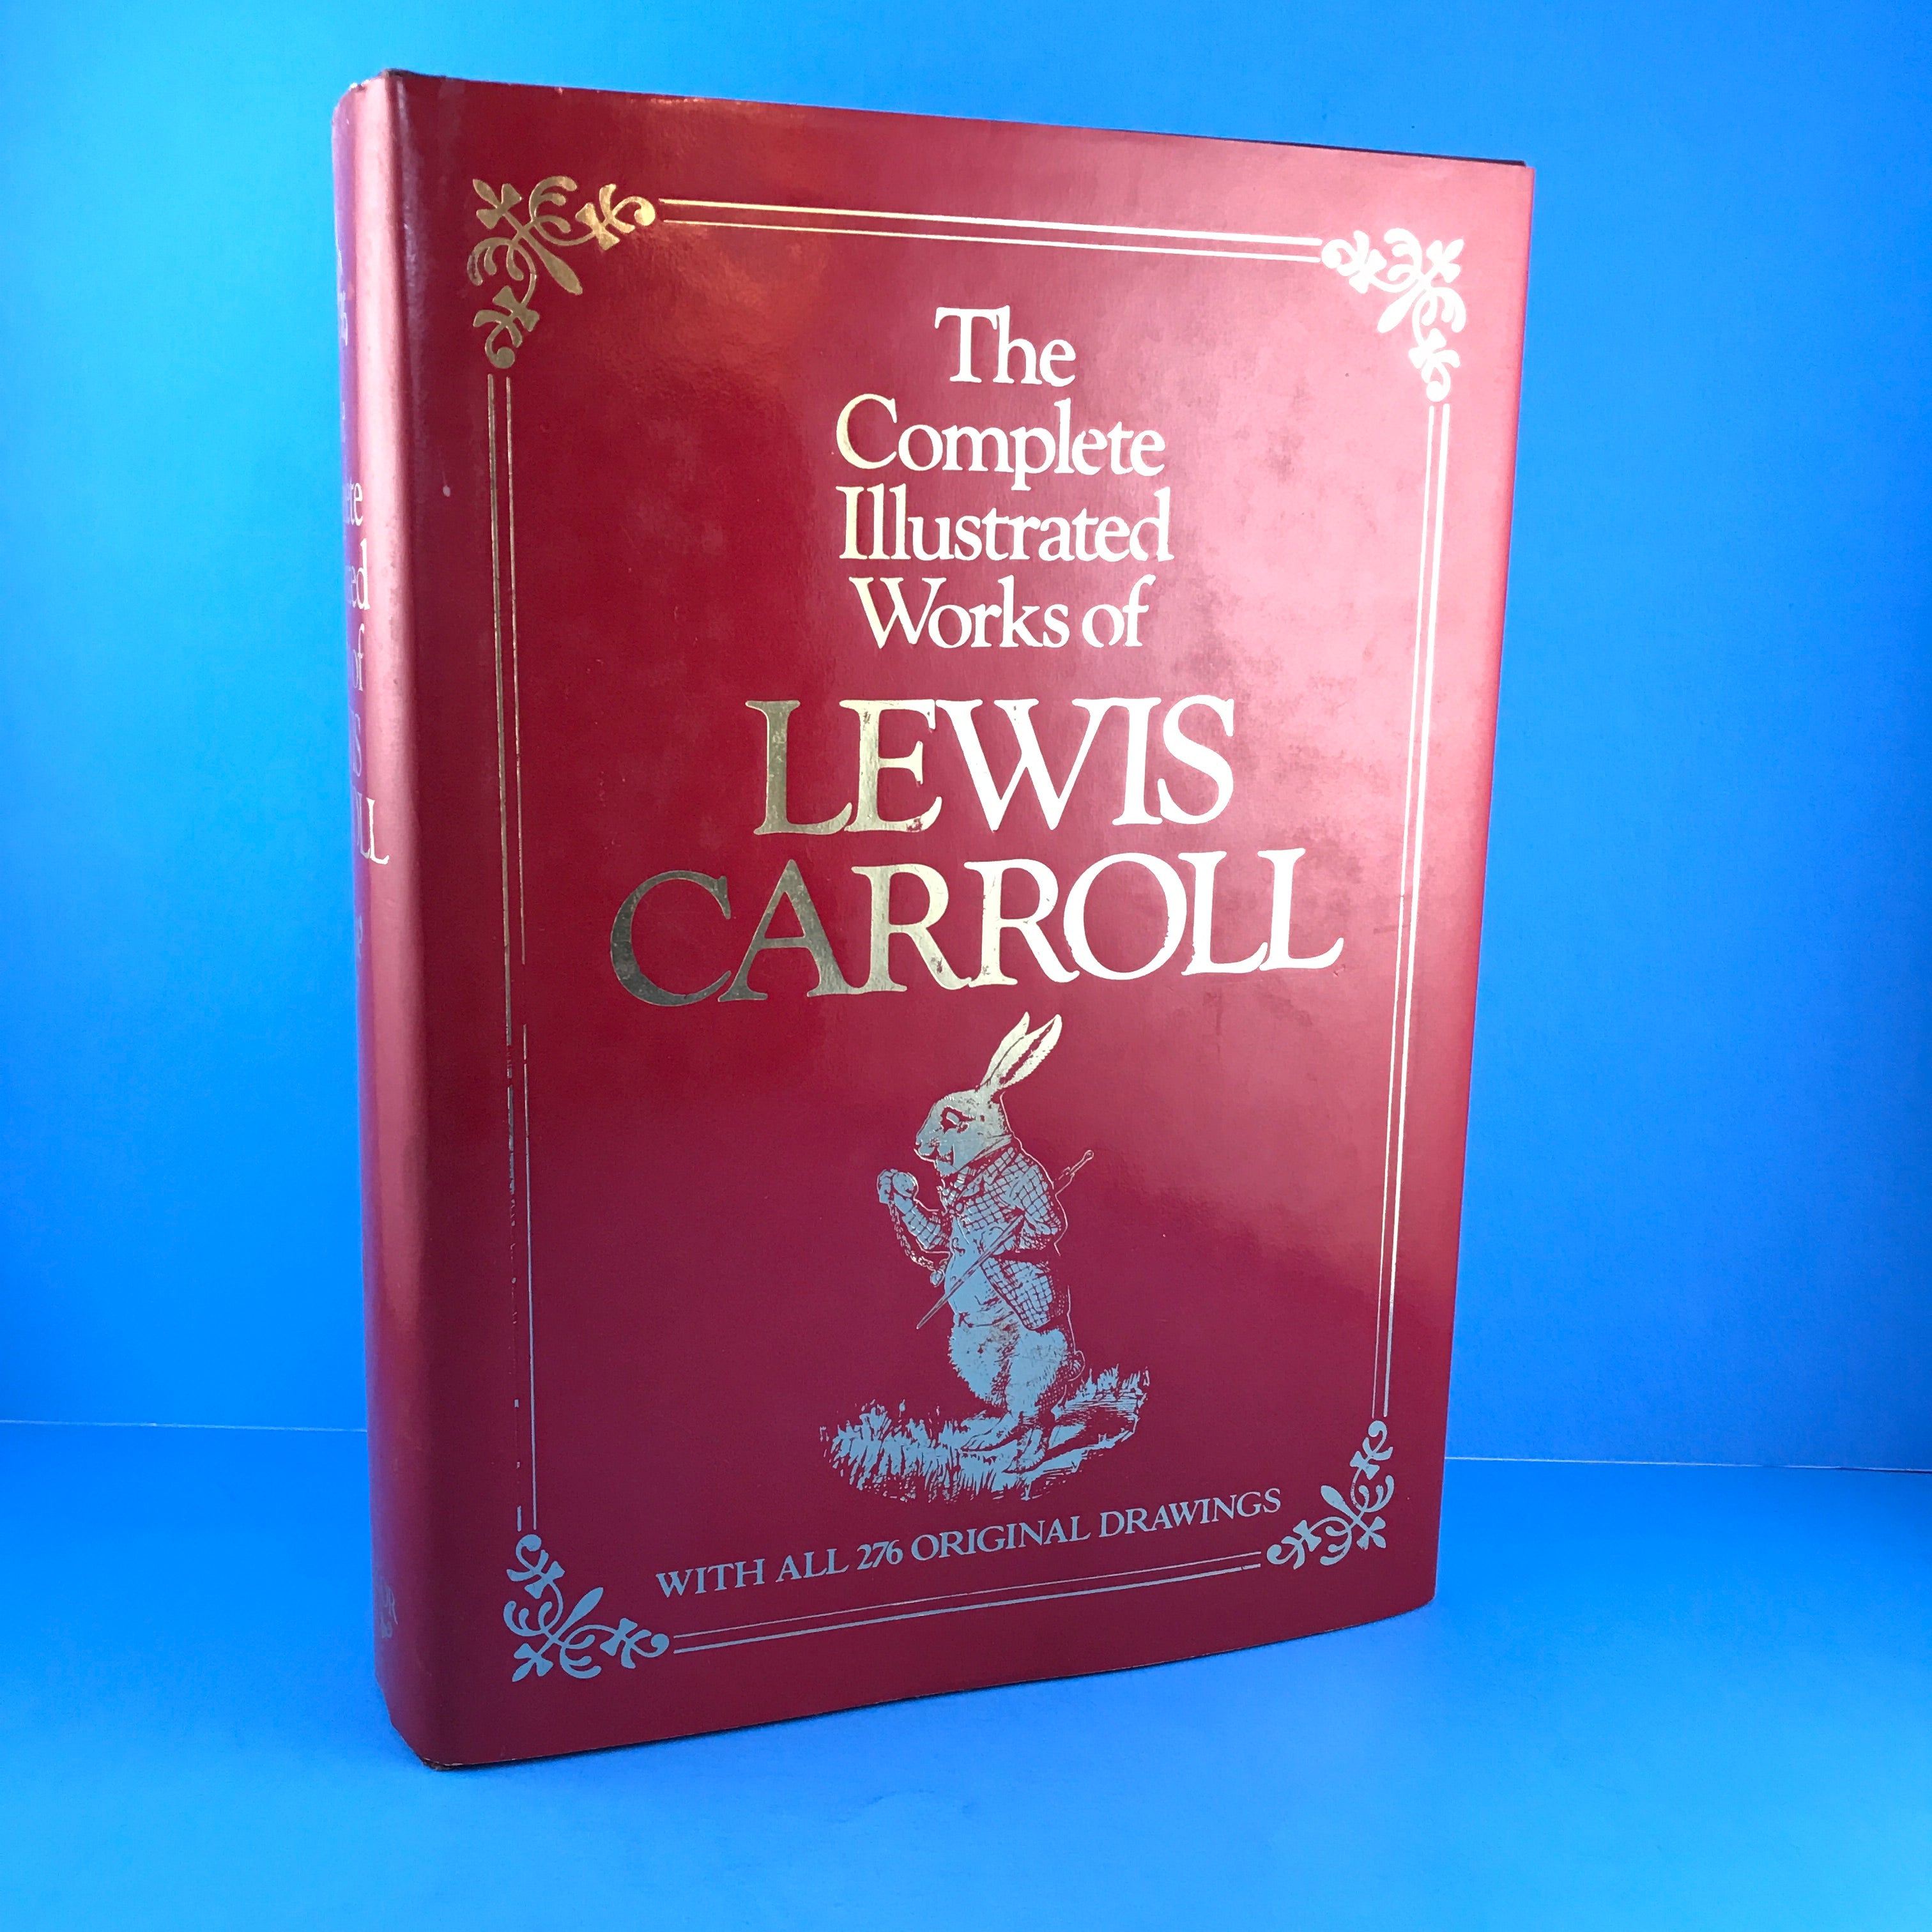 The Complete Illustrated Works of Lewis Carroll – Sparrow's Bookshop